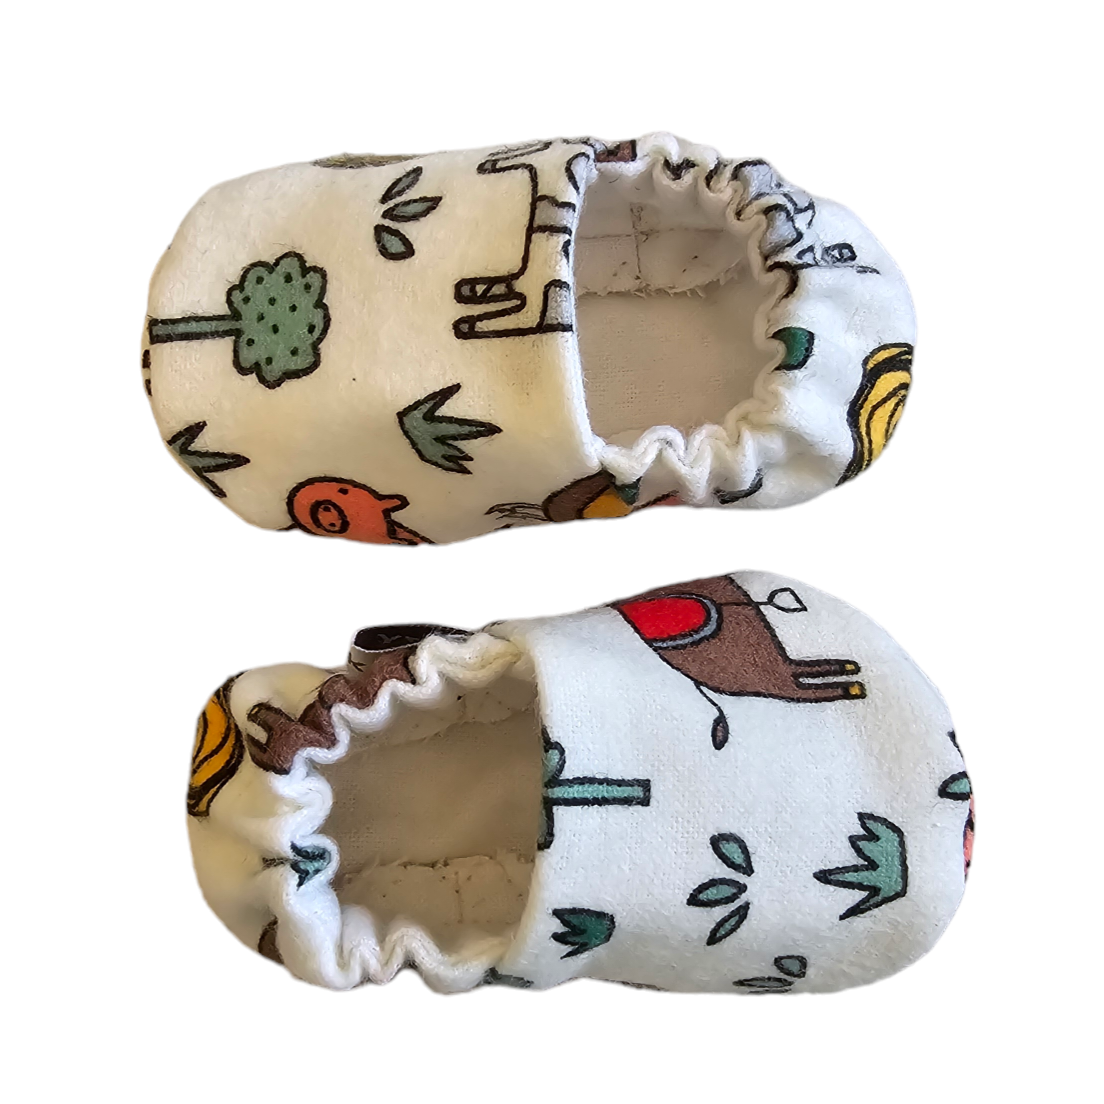 Animal Baby Booties, Baby Gift, baby Moccs, Baby, Animal Baby Slippers, Gender Neutral slippers, Animal Crib Shoes, Newborn Baby shoes